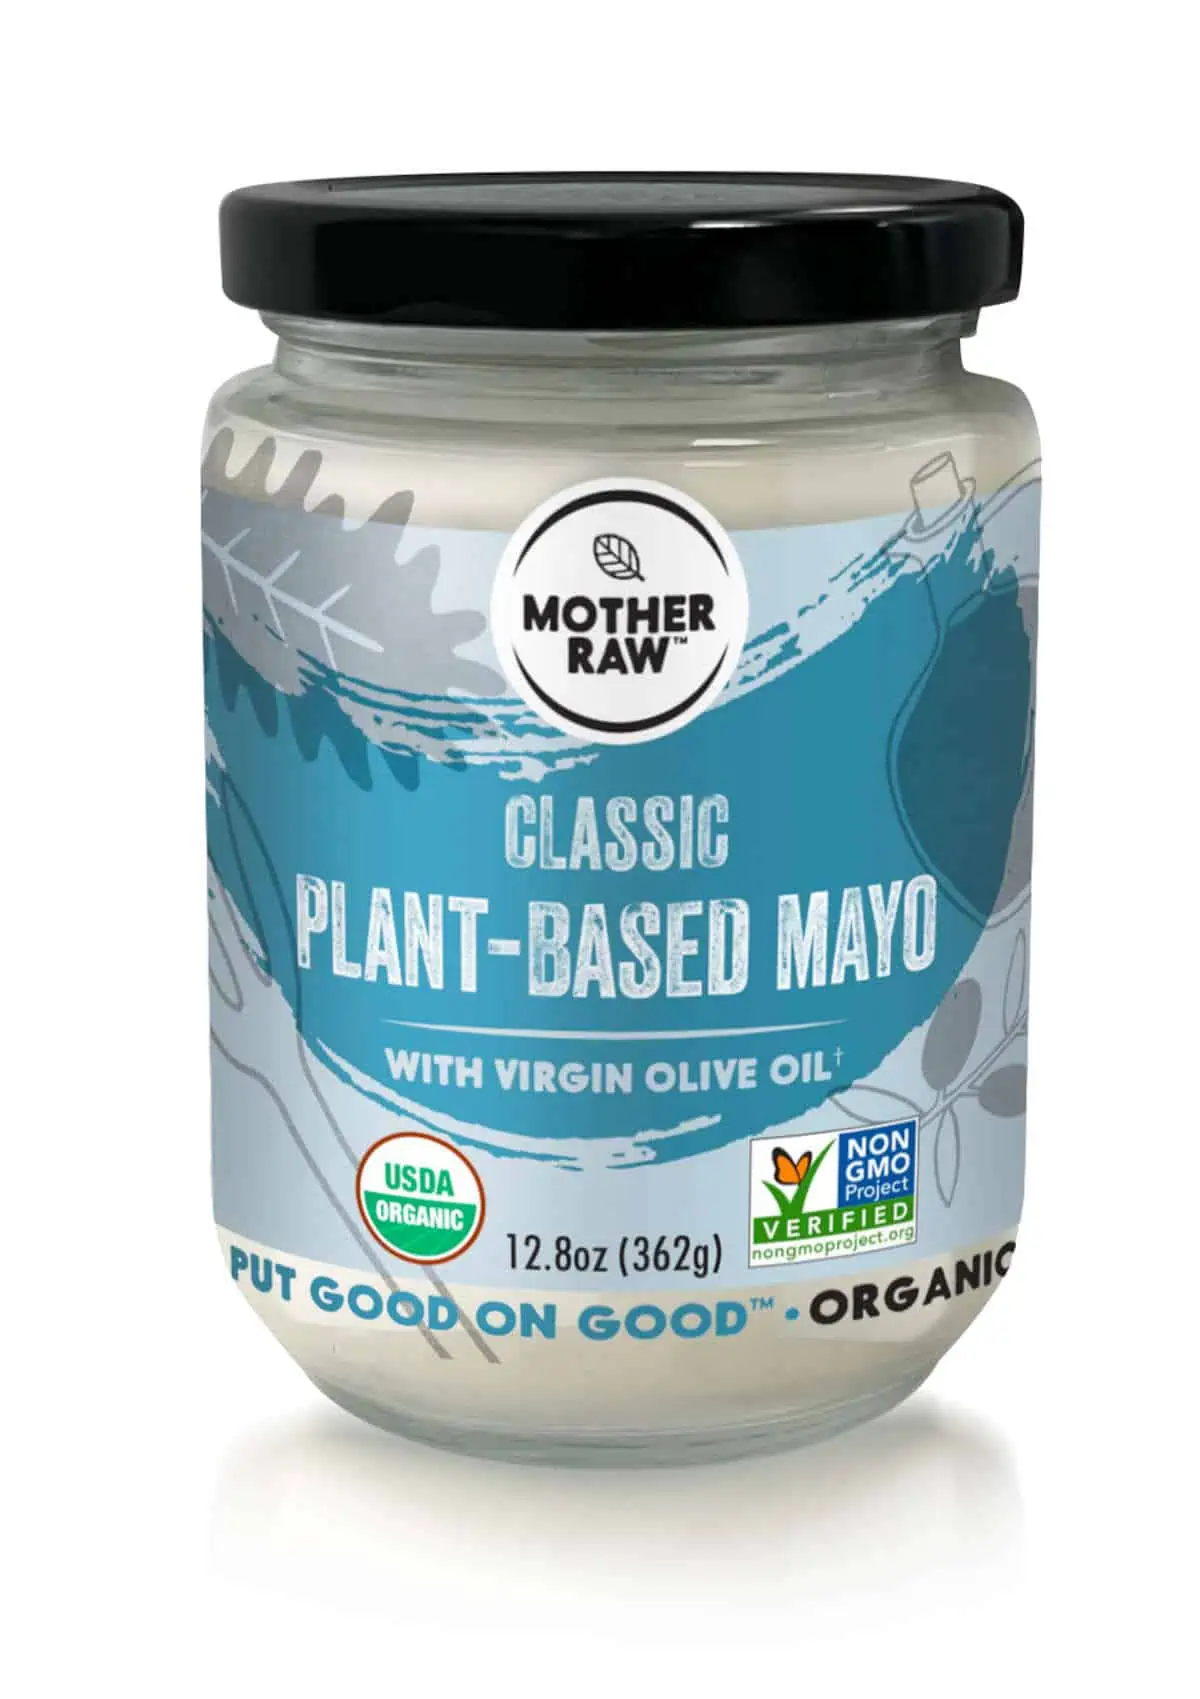 Jar of Mother Raw plant-based mayo in the Classic flavor.